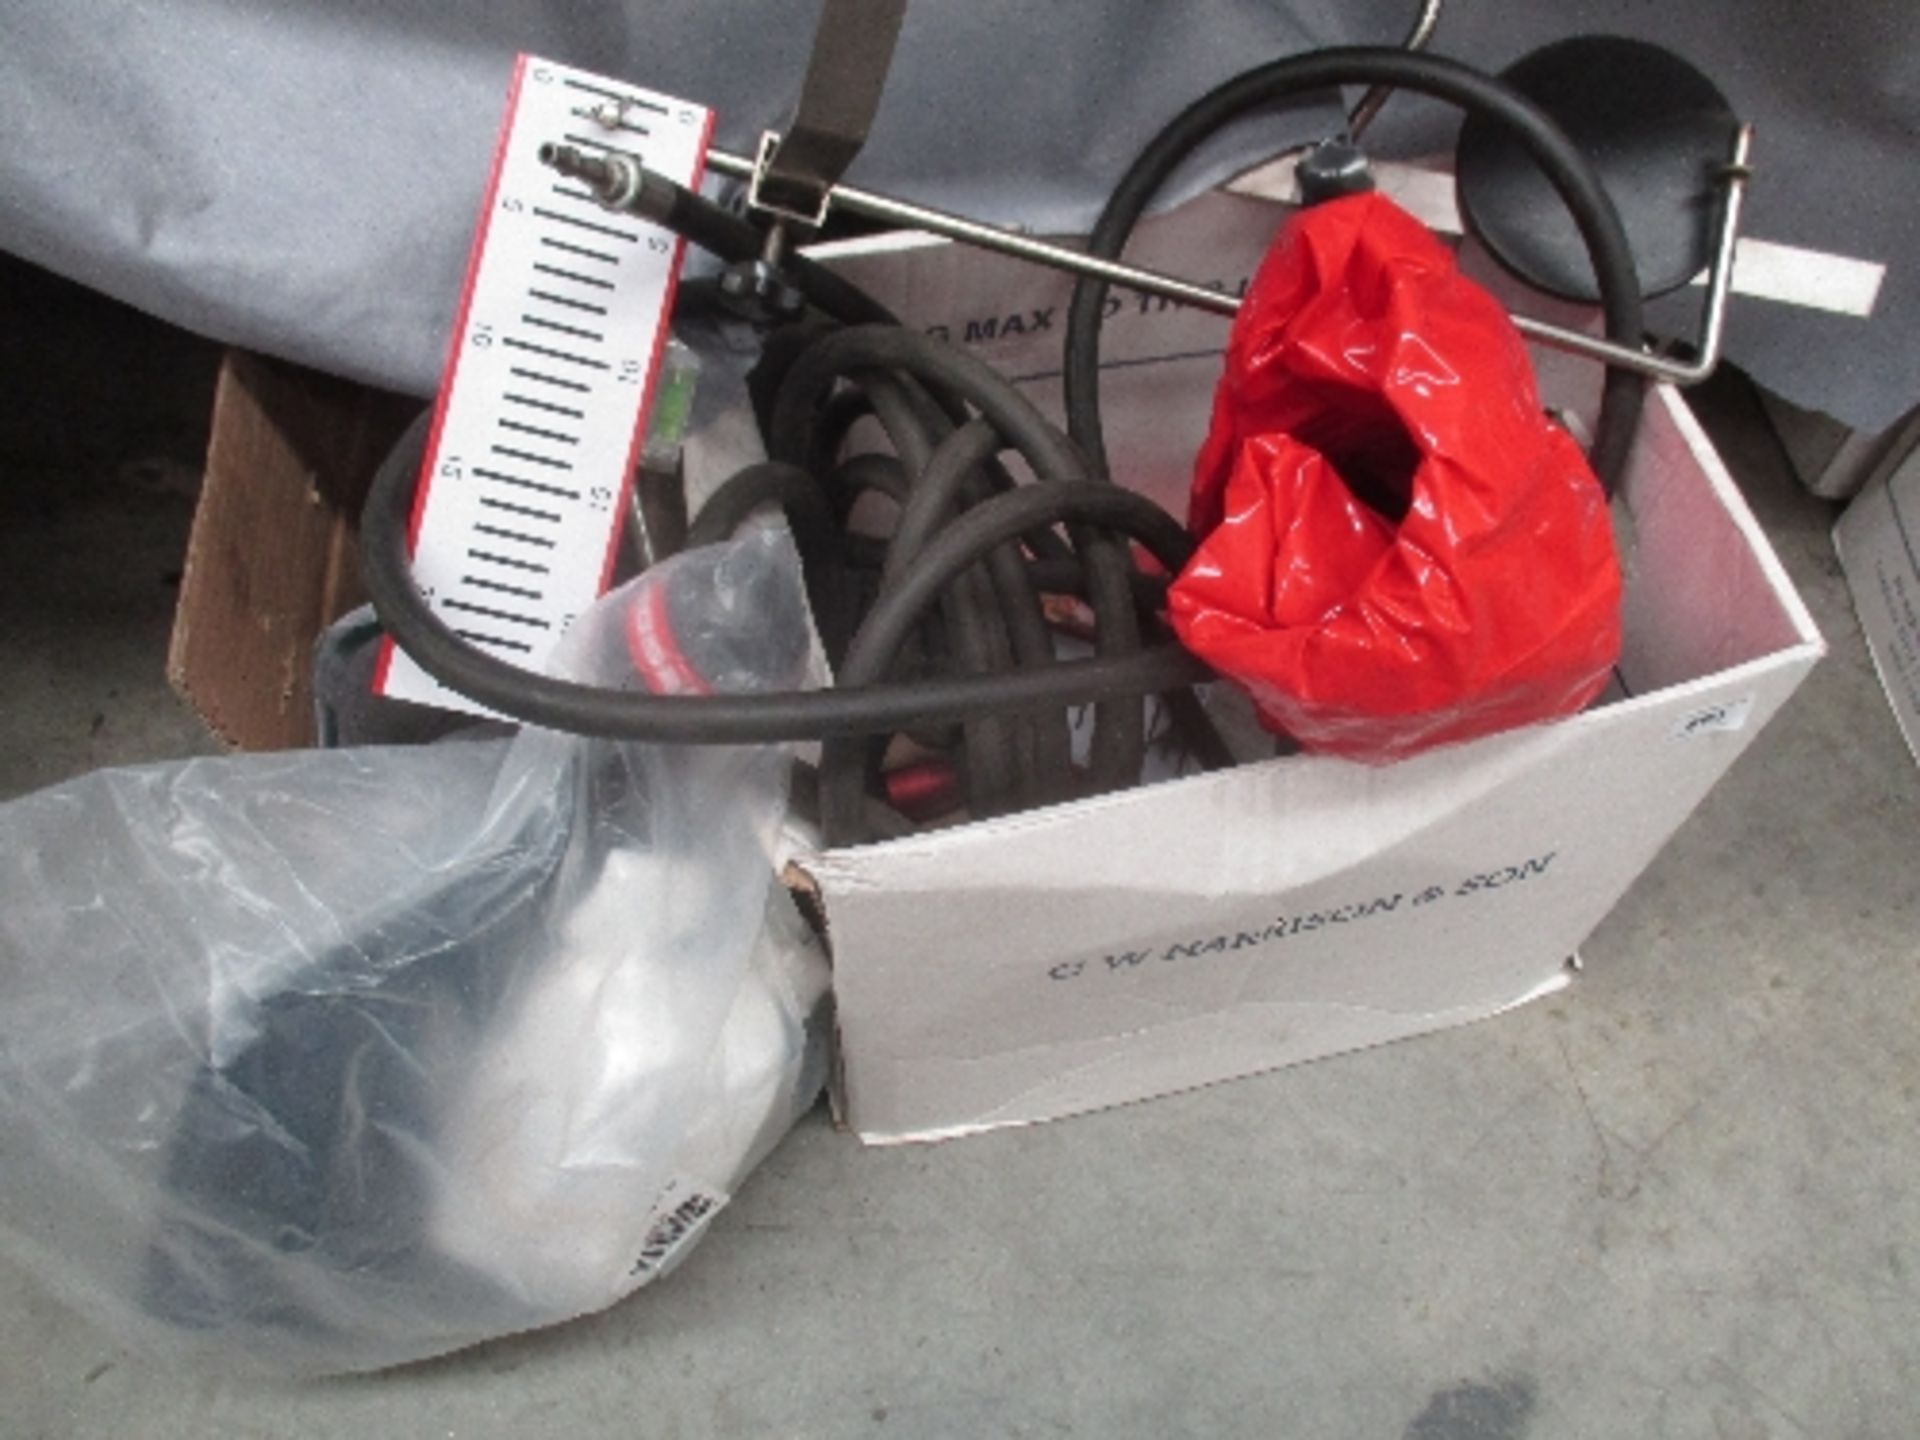 Contents to box - 2 x towing bolt arms, metal towing balls, cable, waterproof cover, etc